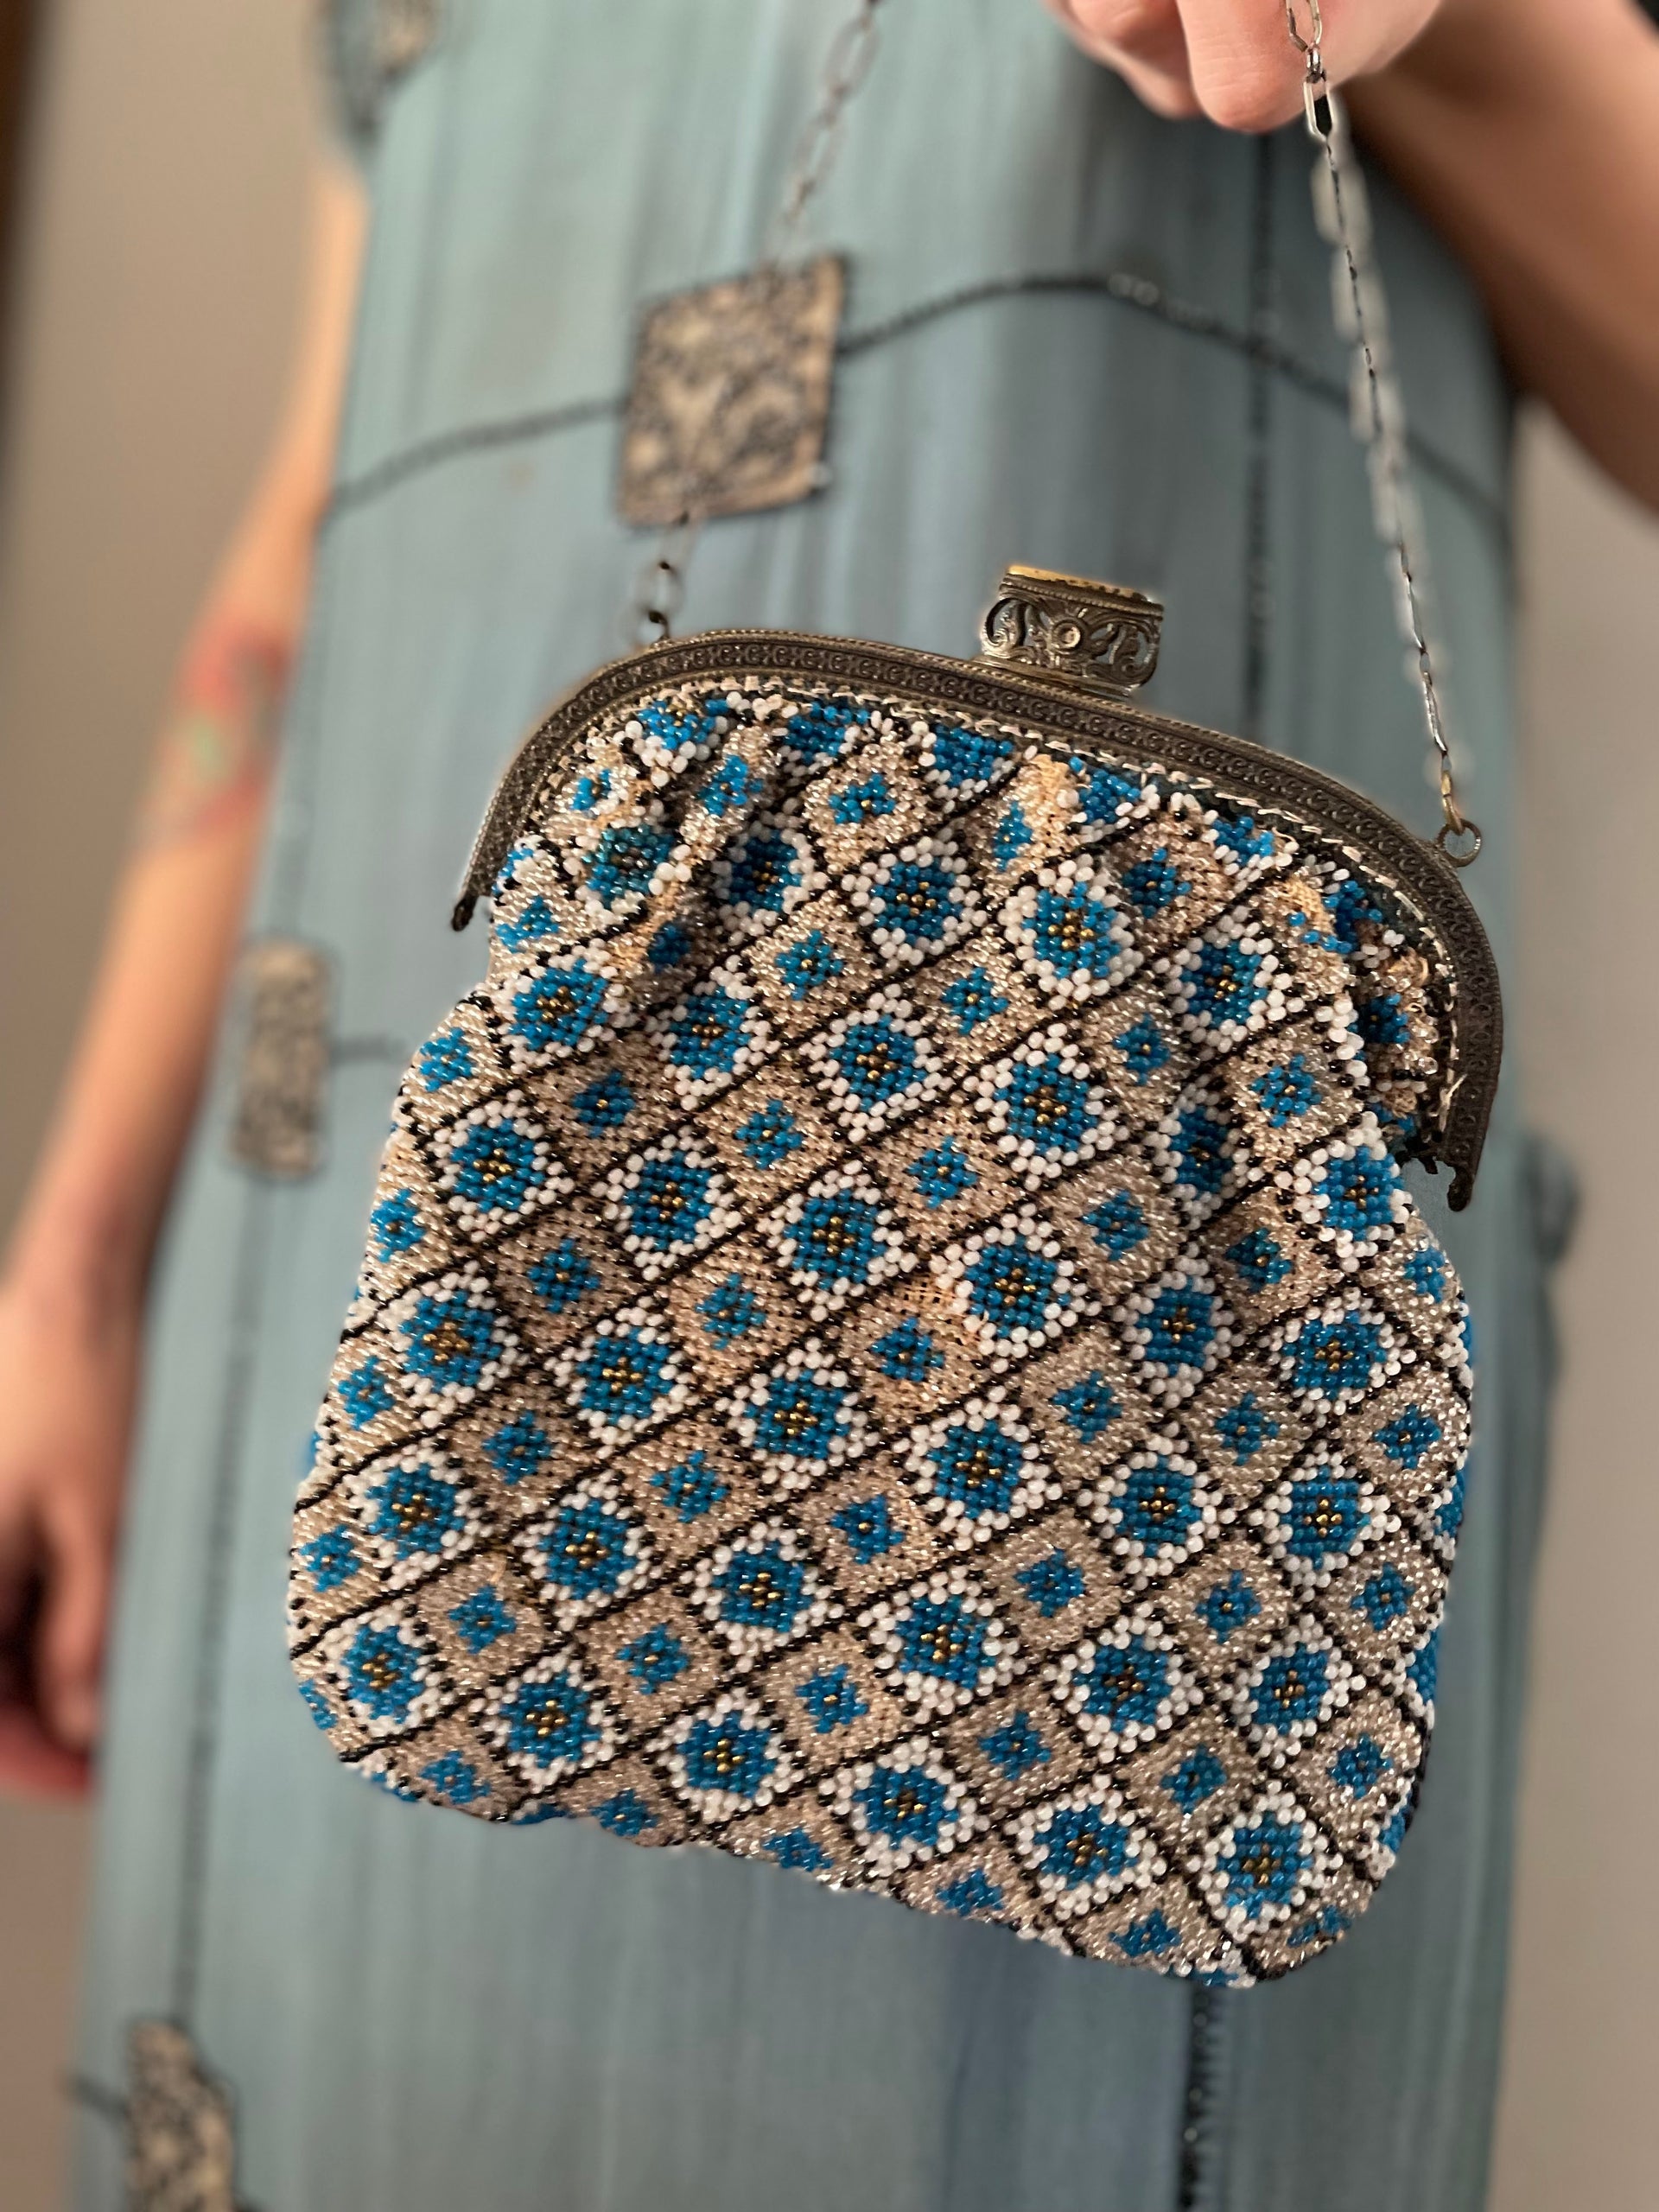 1920s-1930s Vintage Bag With Blue and White Beads